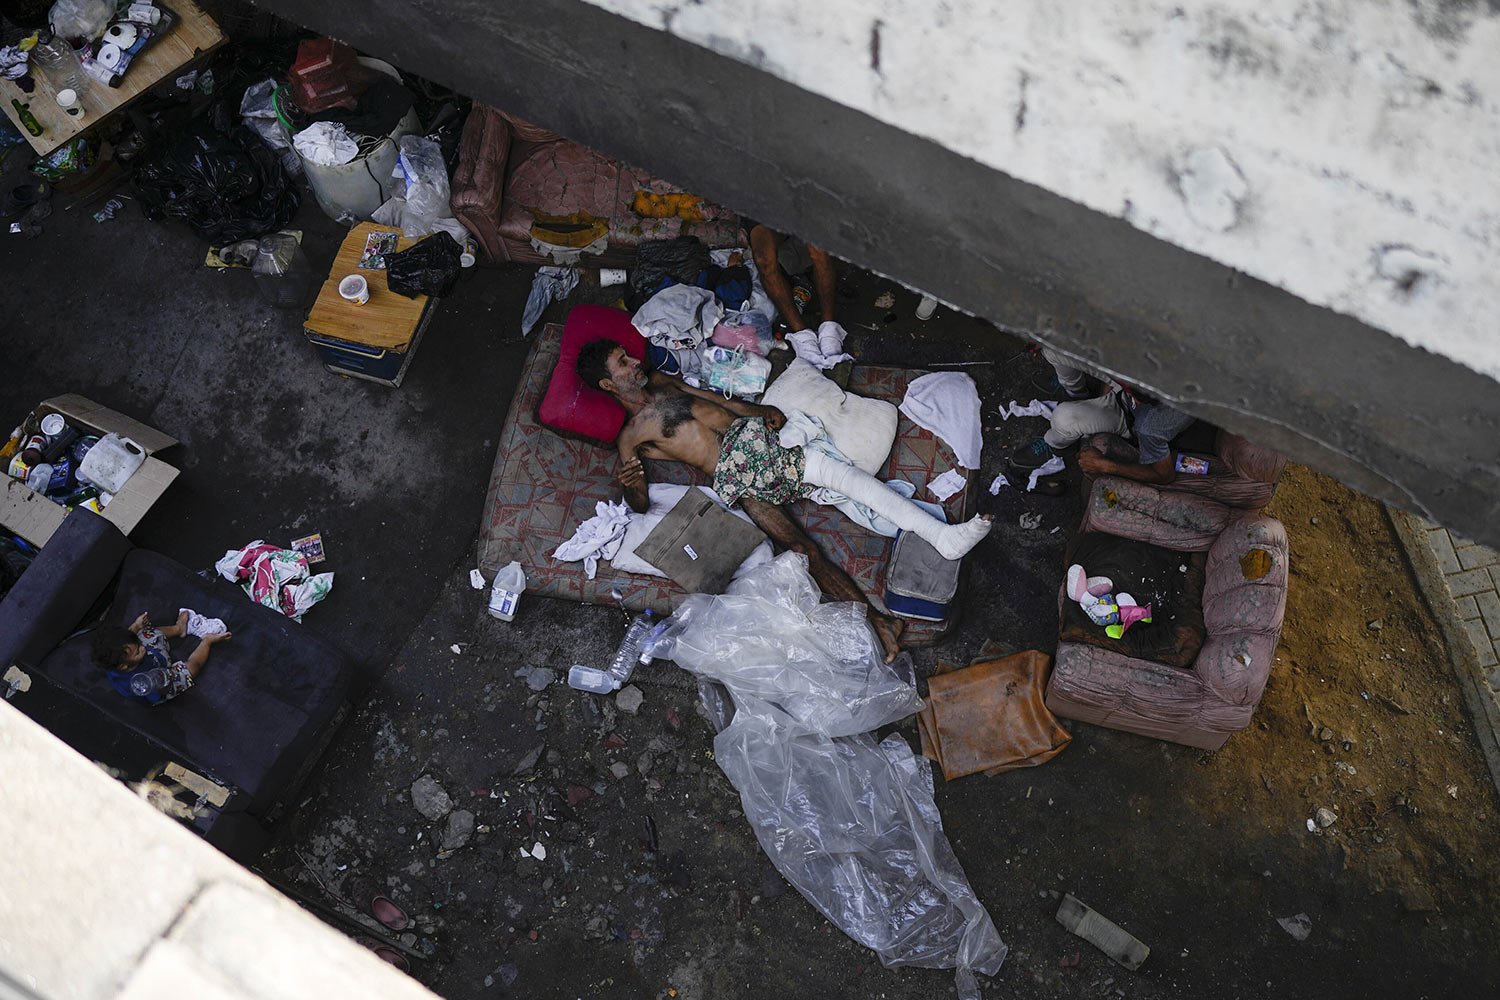  Homeless and injured, Cesar Ramirez lies on a mattress under a bridge in Caracas, Venezuela, Saturday, Aug. 20, 2022. Ramirez, who works informally keeping watch over people's cars, accidentally fell off the bridge while under the influence of alcoh